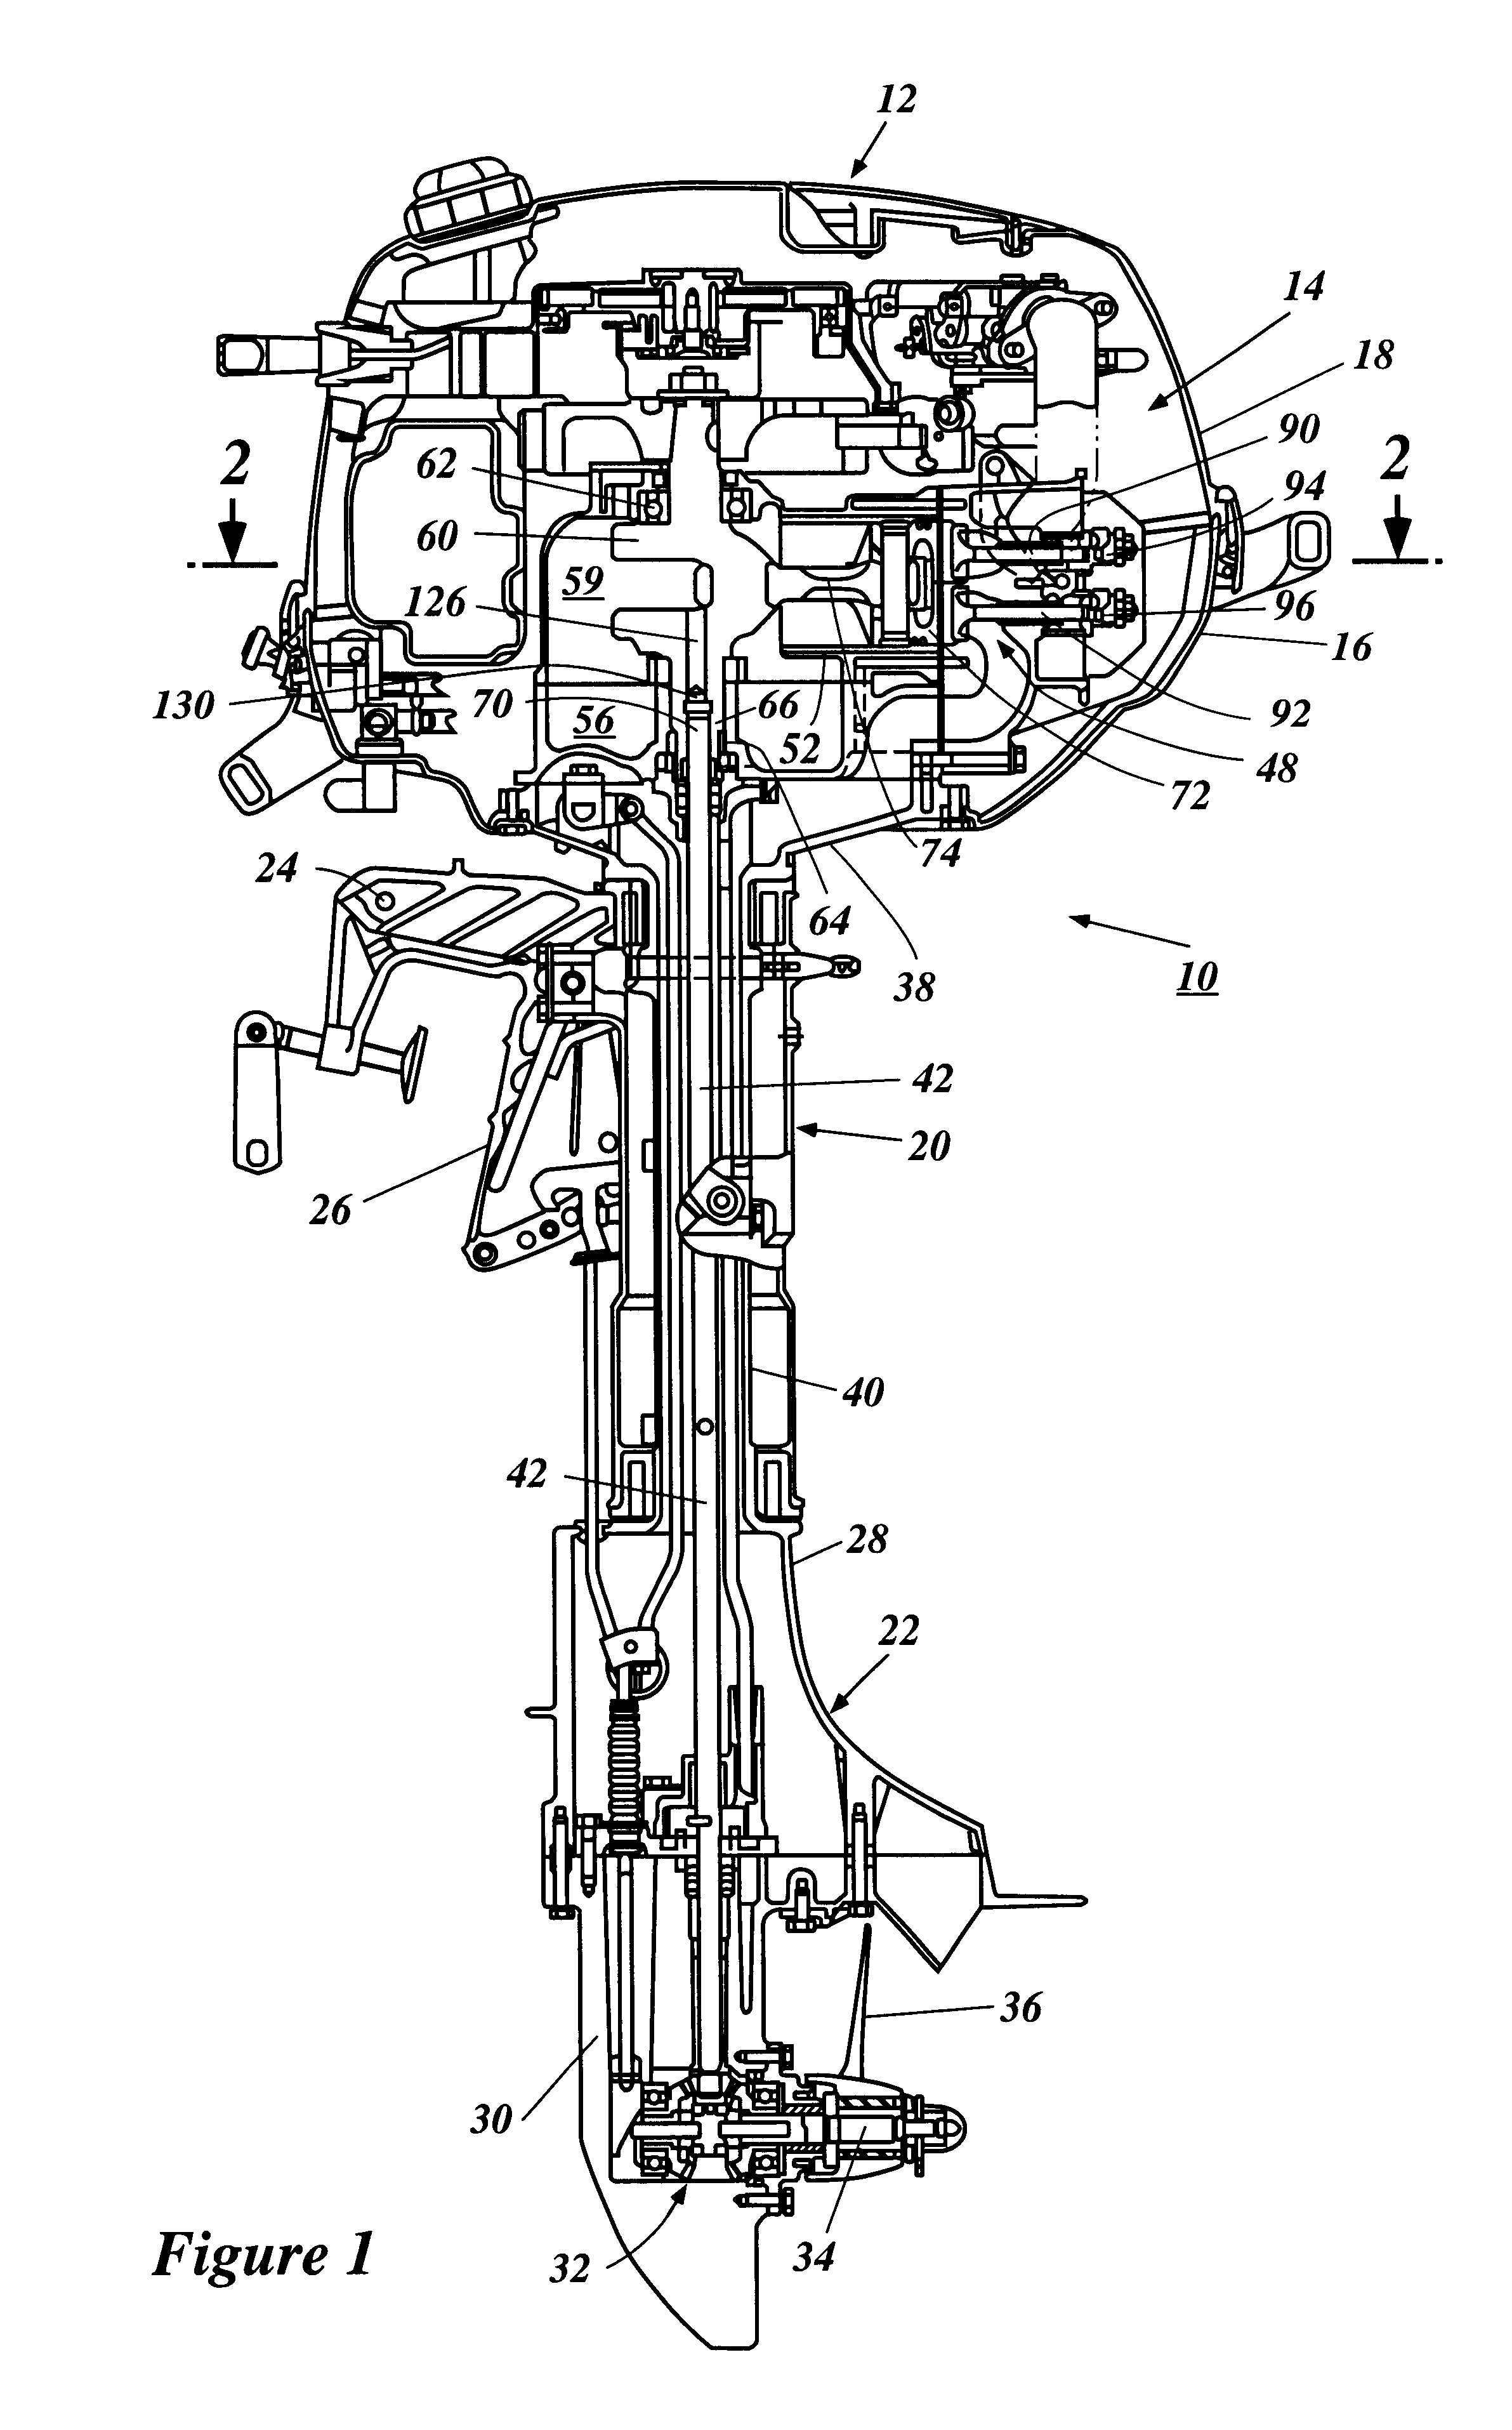 Lubrication system for outboard motor shaft coupling